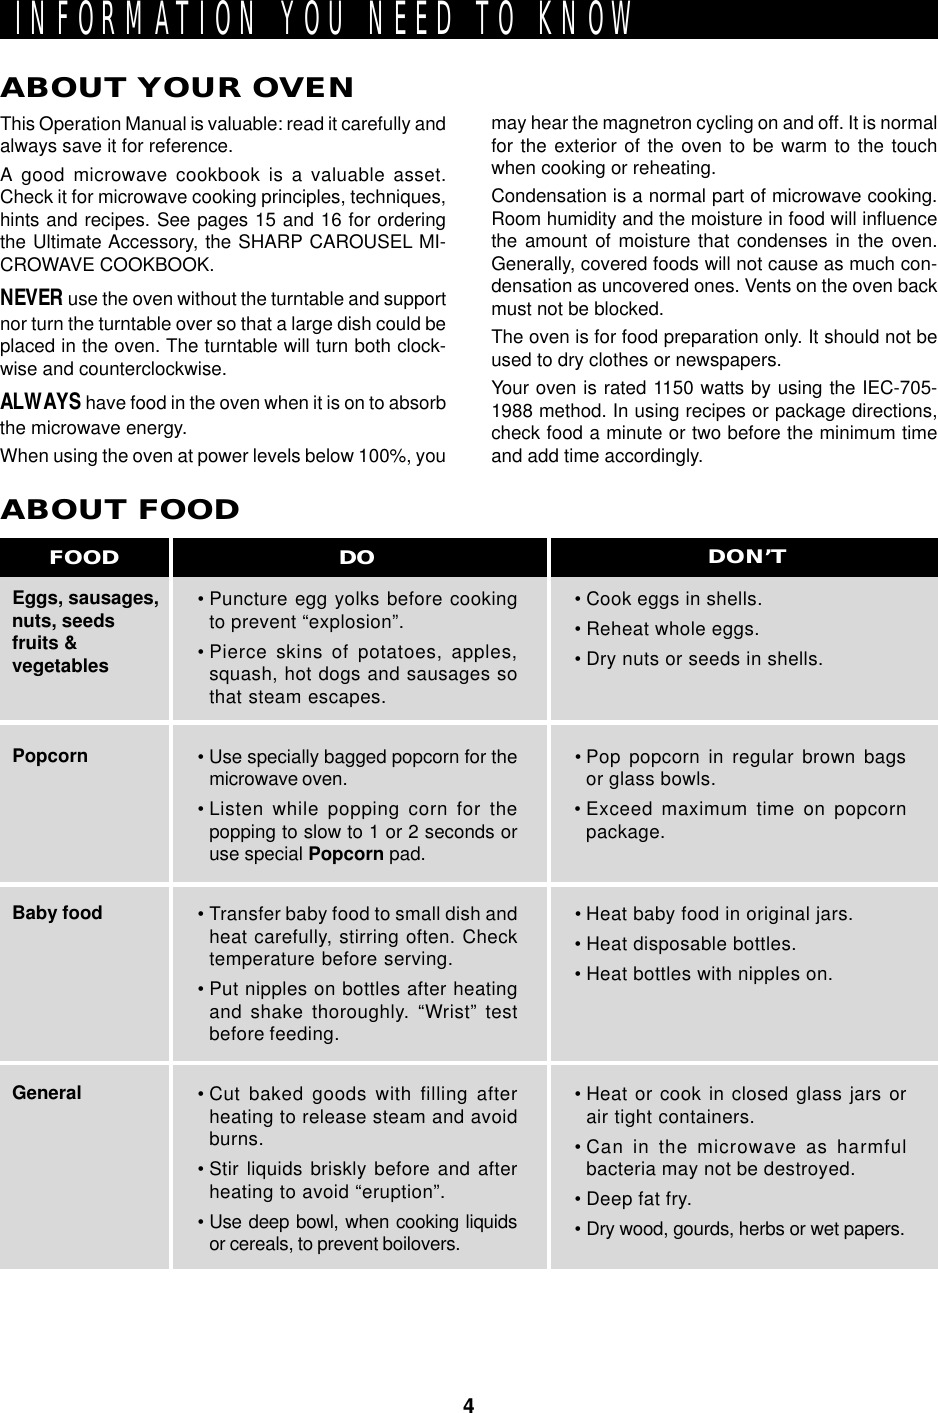 4INFORMATION YOU NEED TO KNOWABOUT YOUR OVENThis Operation Manual is valuable: read it carefully andalways save it for reference.A good microwave cookbook is a valuable asset.Check it for microwave cooking principles, techniques,hints and recipes. See pages 15 and 16 for orderingthe Ultimate Accessory, the SHARP CAROUSEL MI-CROWAVE COOKBOOK.NEVER use the oven without the turntable and supportnor turn the turntable over so that a large dish could beplaced in the oven. The turntable will turn both clock-wise and counterclockwise.ALWAYS have food in the oven when it is on to absorbthe microwave energy.When using the oven at power levels below 100%, youEggs, sausages,nuts, seedsfruits &amp;vegetablesPopcornBaby foodGeneralABOUT FOOD• Puncture egg yolks before cookingto prevent “explosion”.• Pierce skins of potatoes, apples,squash, hot dogs and sausages sothat steam escapes.• Use specially bagged popcorn for themicrowave oven.• Listen while popping corn for thepopping to slow to 1 or 2 seconds oruse special Popcorn pad.• Transfer baby food to small dish andheat carefully, stirring often. Checktemperature before serving.• Put nipples on bottles after heatingand shake thoroughly. “Wrist” testbefore feeding.• Cut baked goods with filling afterheating to release steam and avoidburns.• Stir liquids briskly before and afterheating to avoid “eruption”.• Use deep bowl, when cooking liquidsor cereals, to prevent boilovers.• Cook eggs in shells.• Reheat whole eggs.• Dry nuts or seeds in shells.• Pop popcorn in regular brown bagsor glass bowls.• Exceed maximum time on popcornpackage.• Heat baby food in original jars.• Heat disposable bottles.• Heat bottles with nipples on.• Heat or cook in closed glass jars orair tight containers.• Can in the microwave as harmfulbacteria may not be destroyed.• Deep fat fry.• Dry wood, gourds, herbs or wet papers.DO DON’TFOODmay hear the magnetron cycling on and off. It is normalfor the exterior of the oven to be warm to the touchwhen cooking or reheating.Condensation is a normal part of microwave cooking.Room humidity and the moisture in food will influencethe amount of moisture that condenses in the oven.Generally, covered foods will not cause as much con-densation as uncovered ones. Vents on the oven backmust not be blocked.The oven is for food preparation only. It should not beused to dry clothes or newspapers.Your oven is rated 1150 watts by using the IEC-705-1988 method. In using recipes or package directions,check food a minute or two before the minimum timeand add time accordingly.